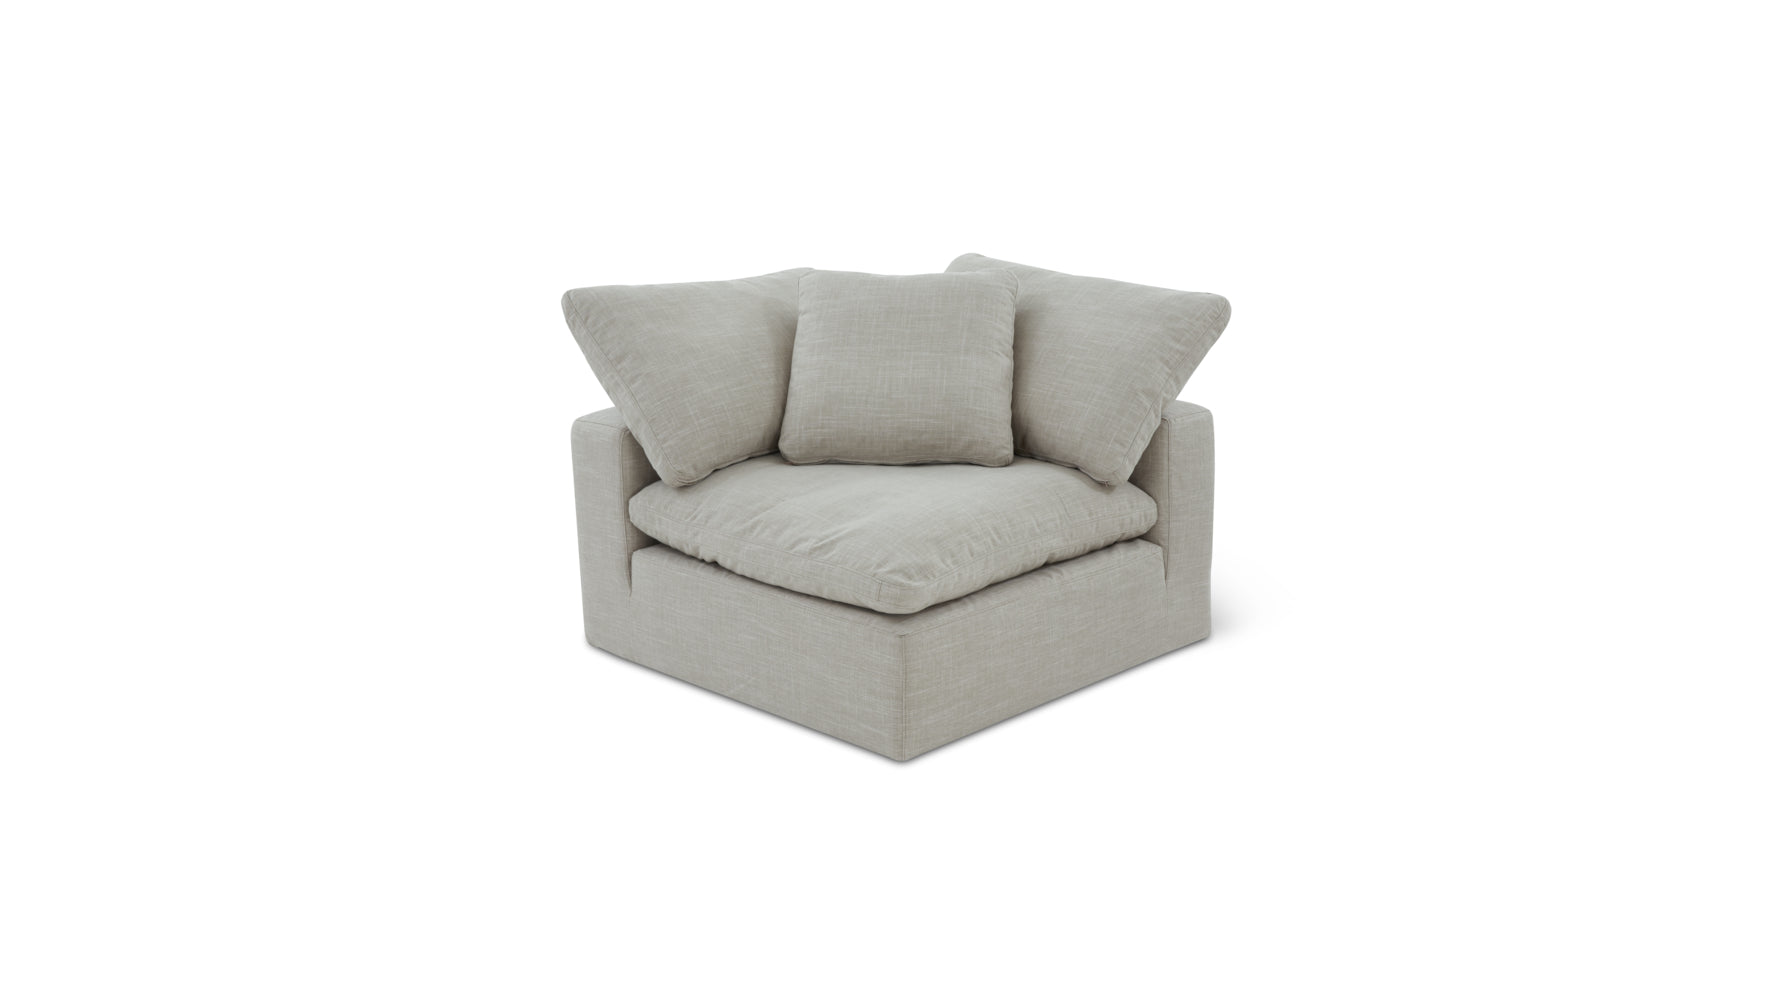 Movie Night™ Corner Chair, Large, Light Pebble (Left or Right) - Image 3